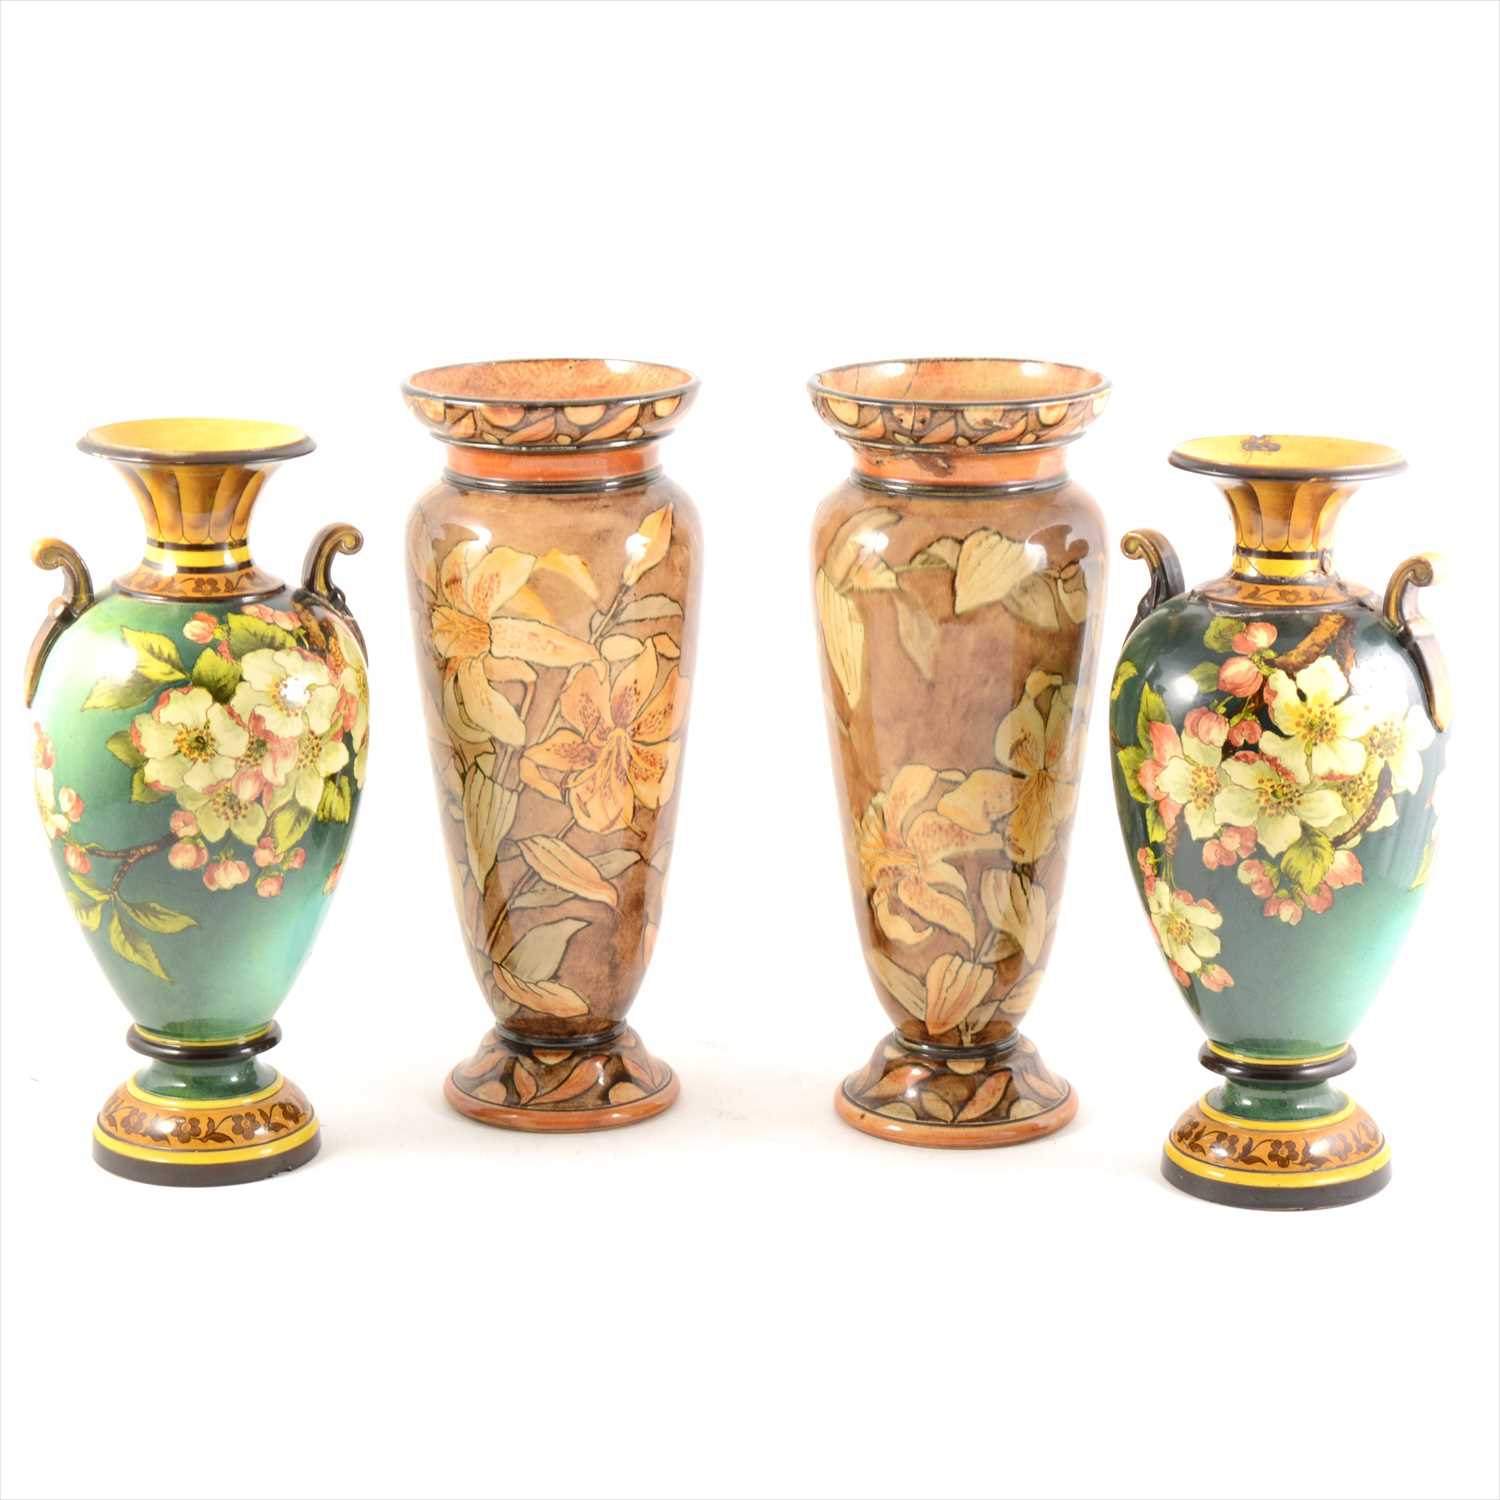 Lot 68 - Two pairs of Doulton Faience ware vases, damaged